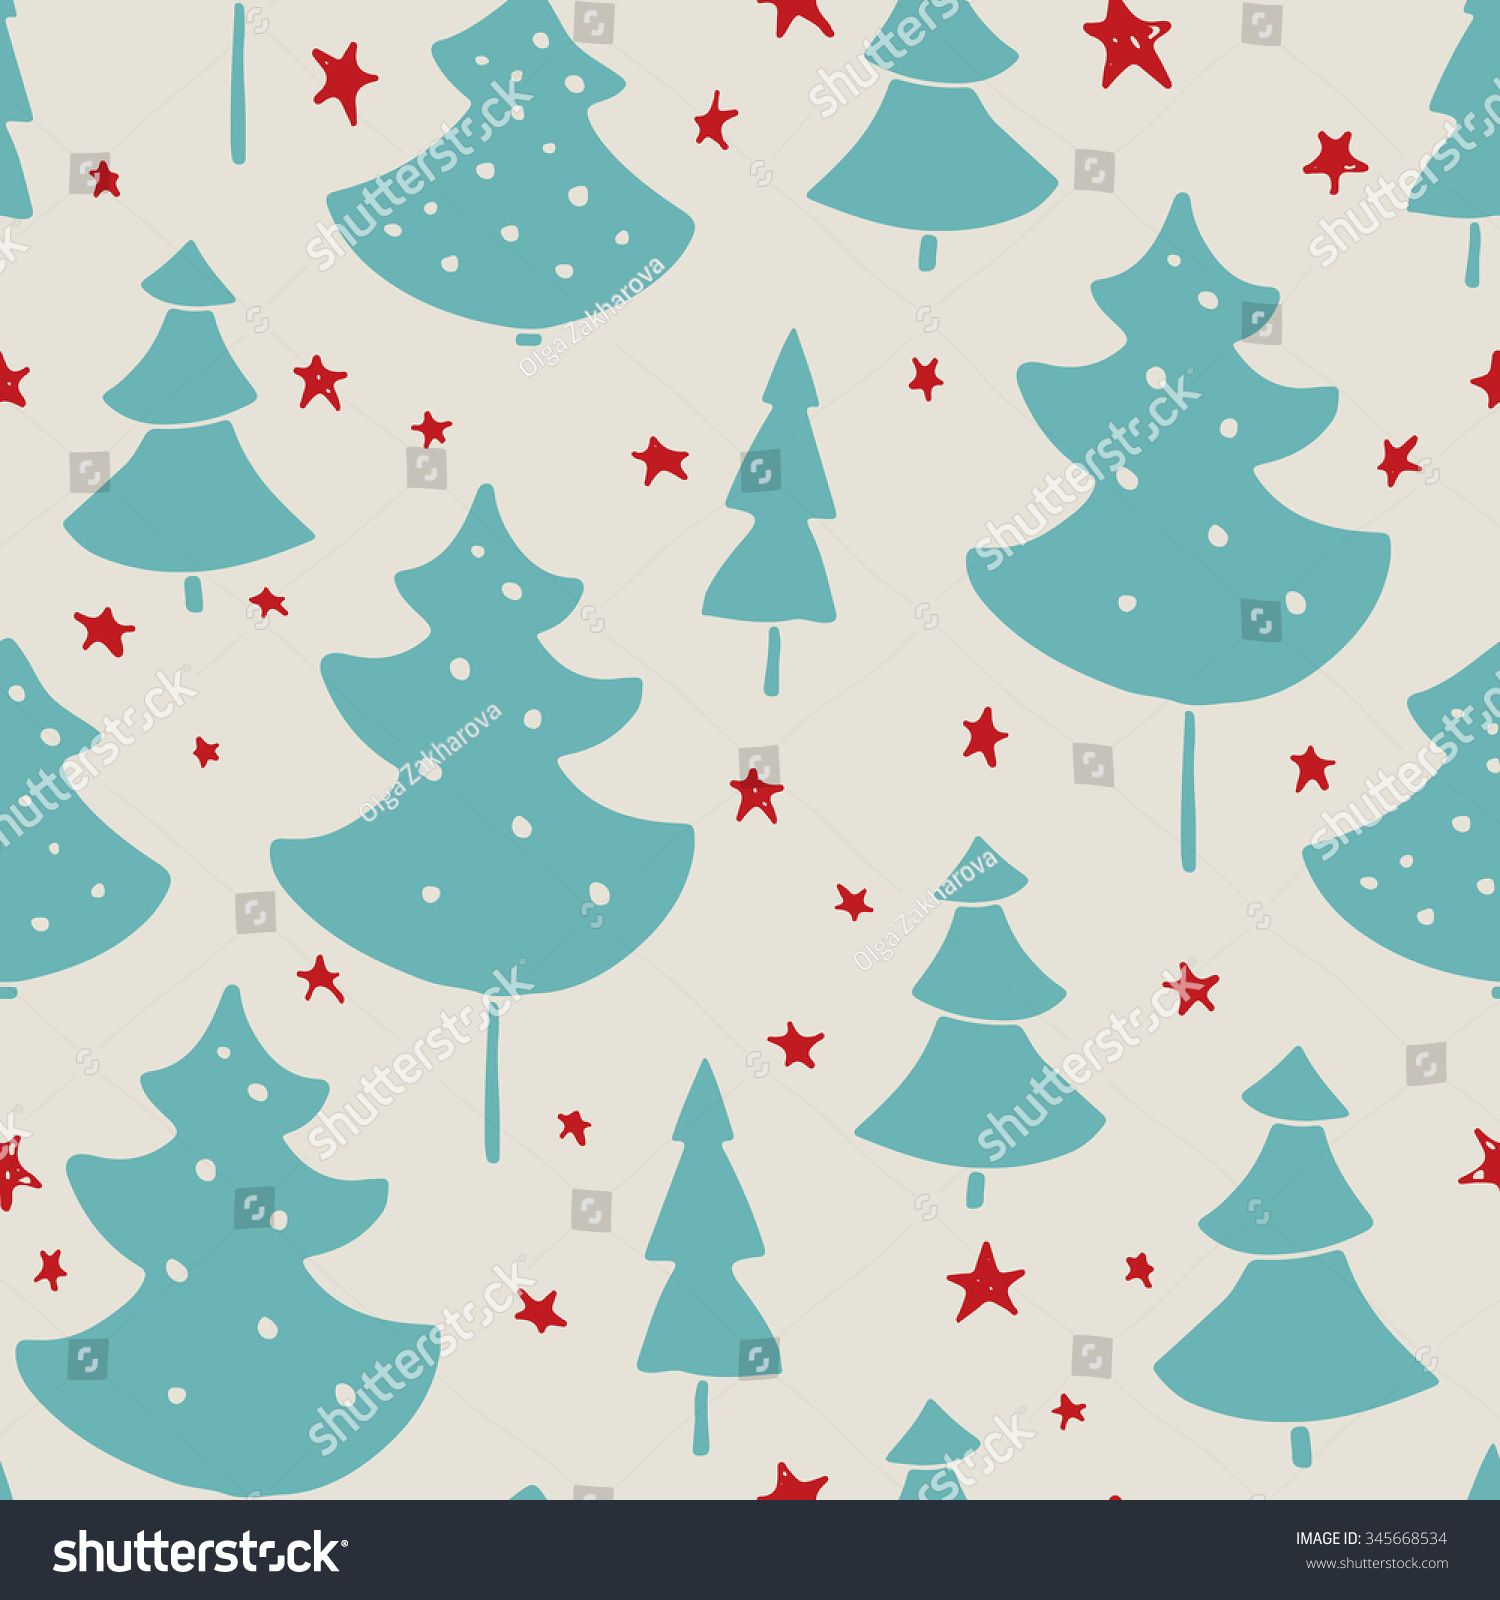 Handdrawn Christmas Seamless Pattern With Christmas Trees And ...